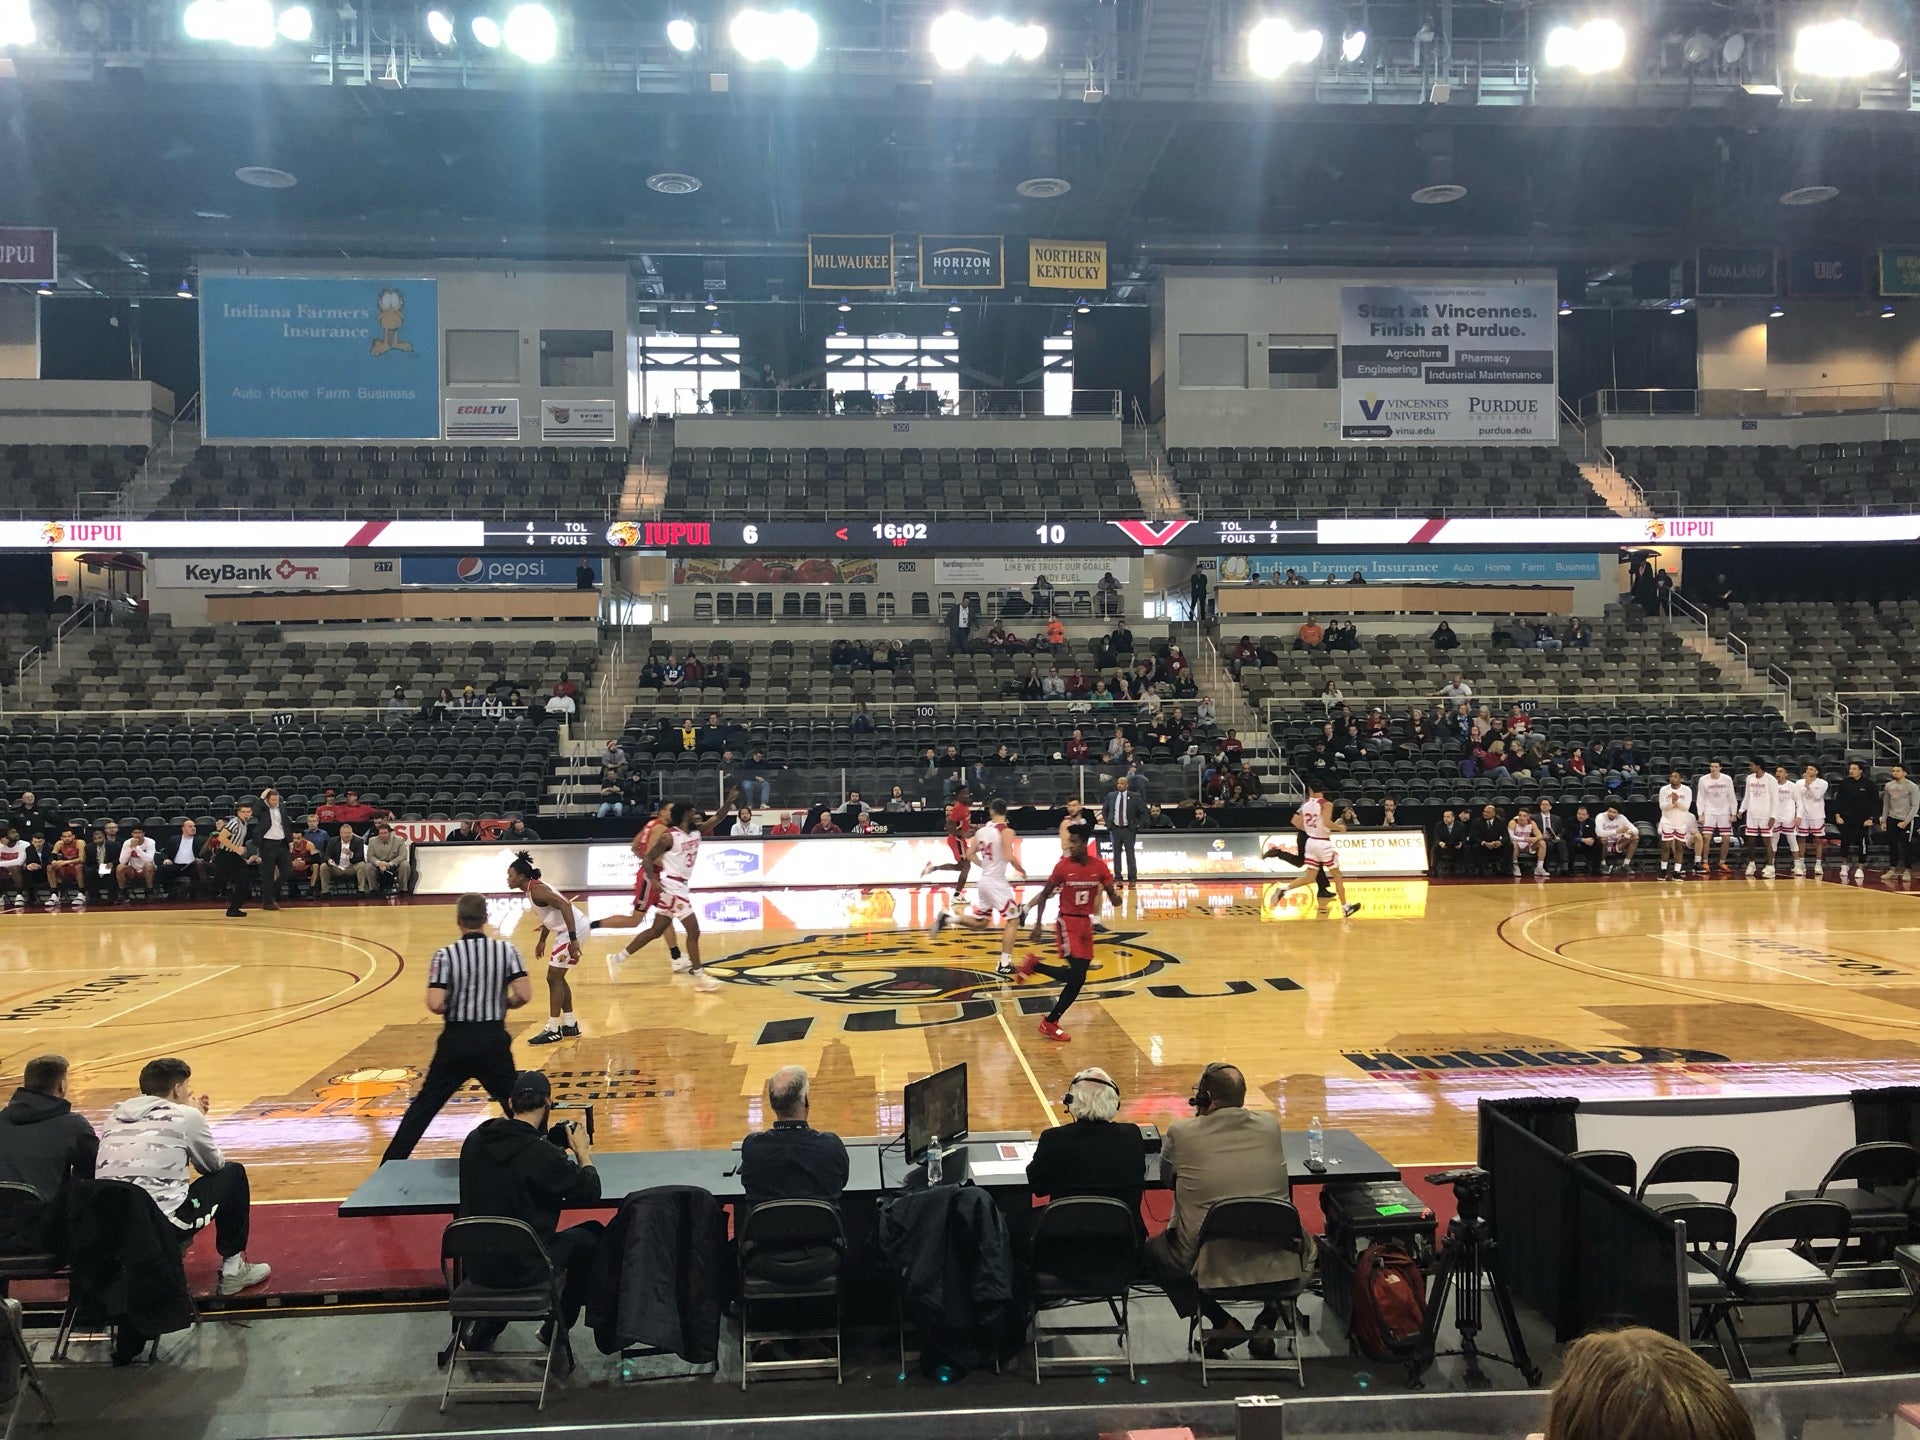 section 109 seat view  - indiana farmers coliseum